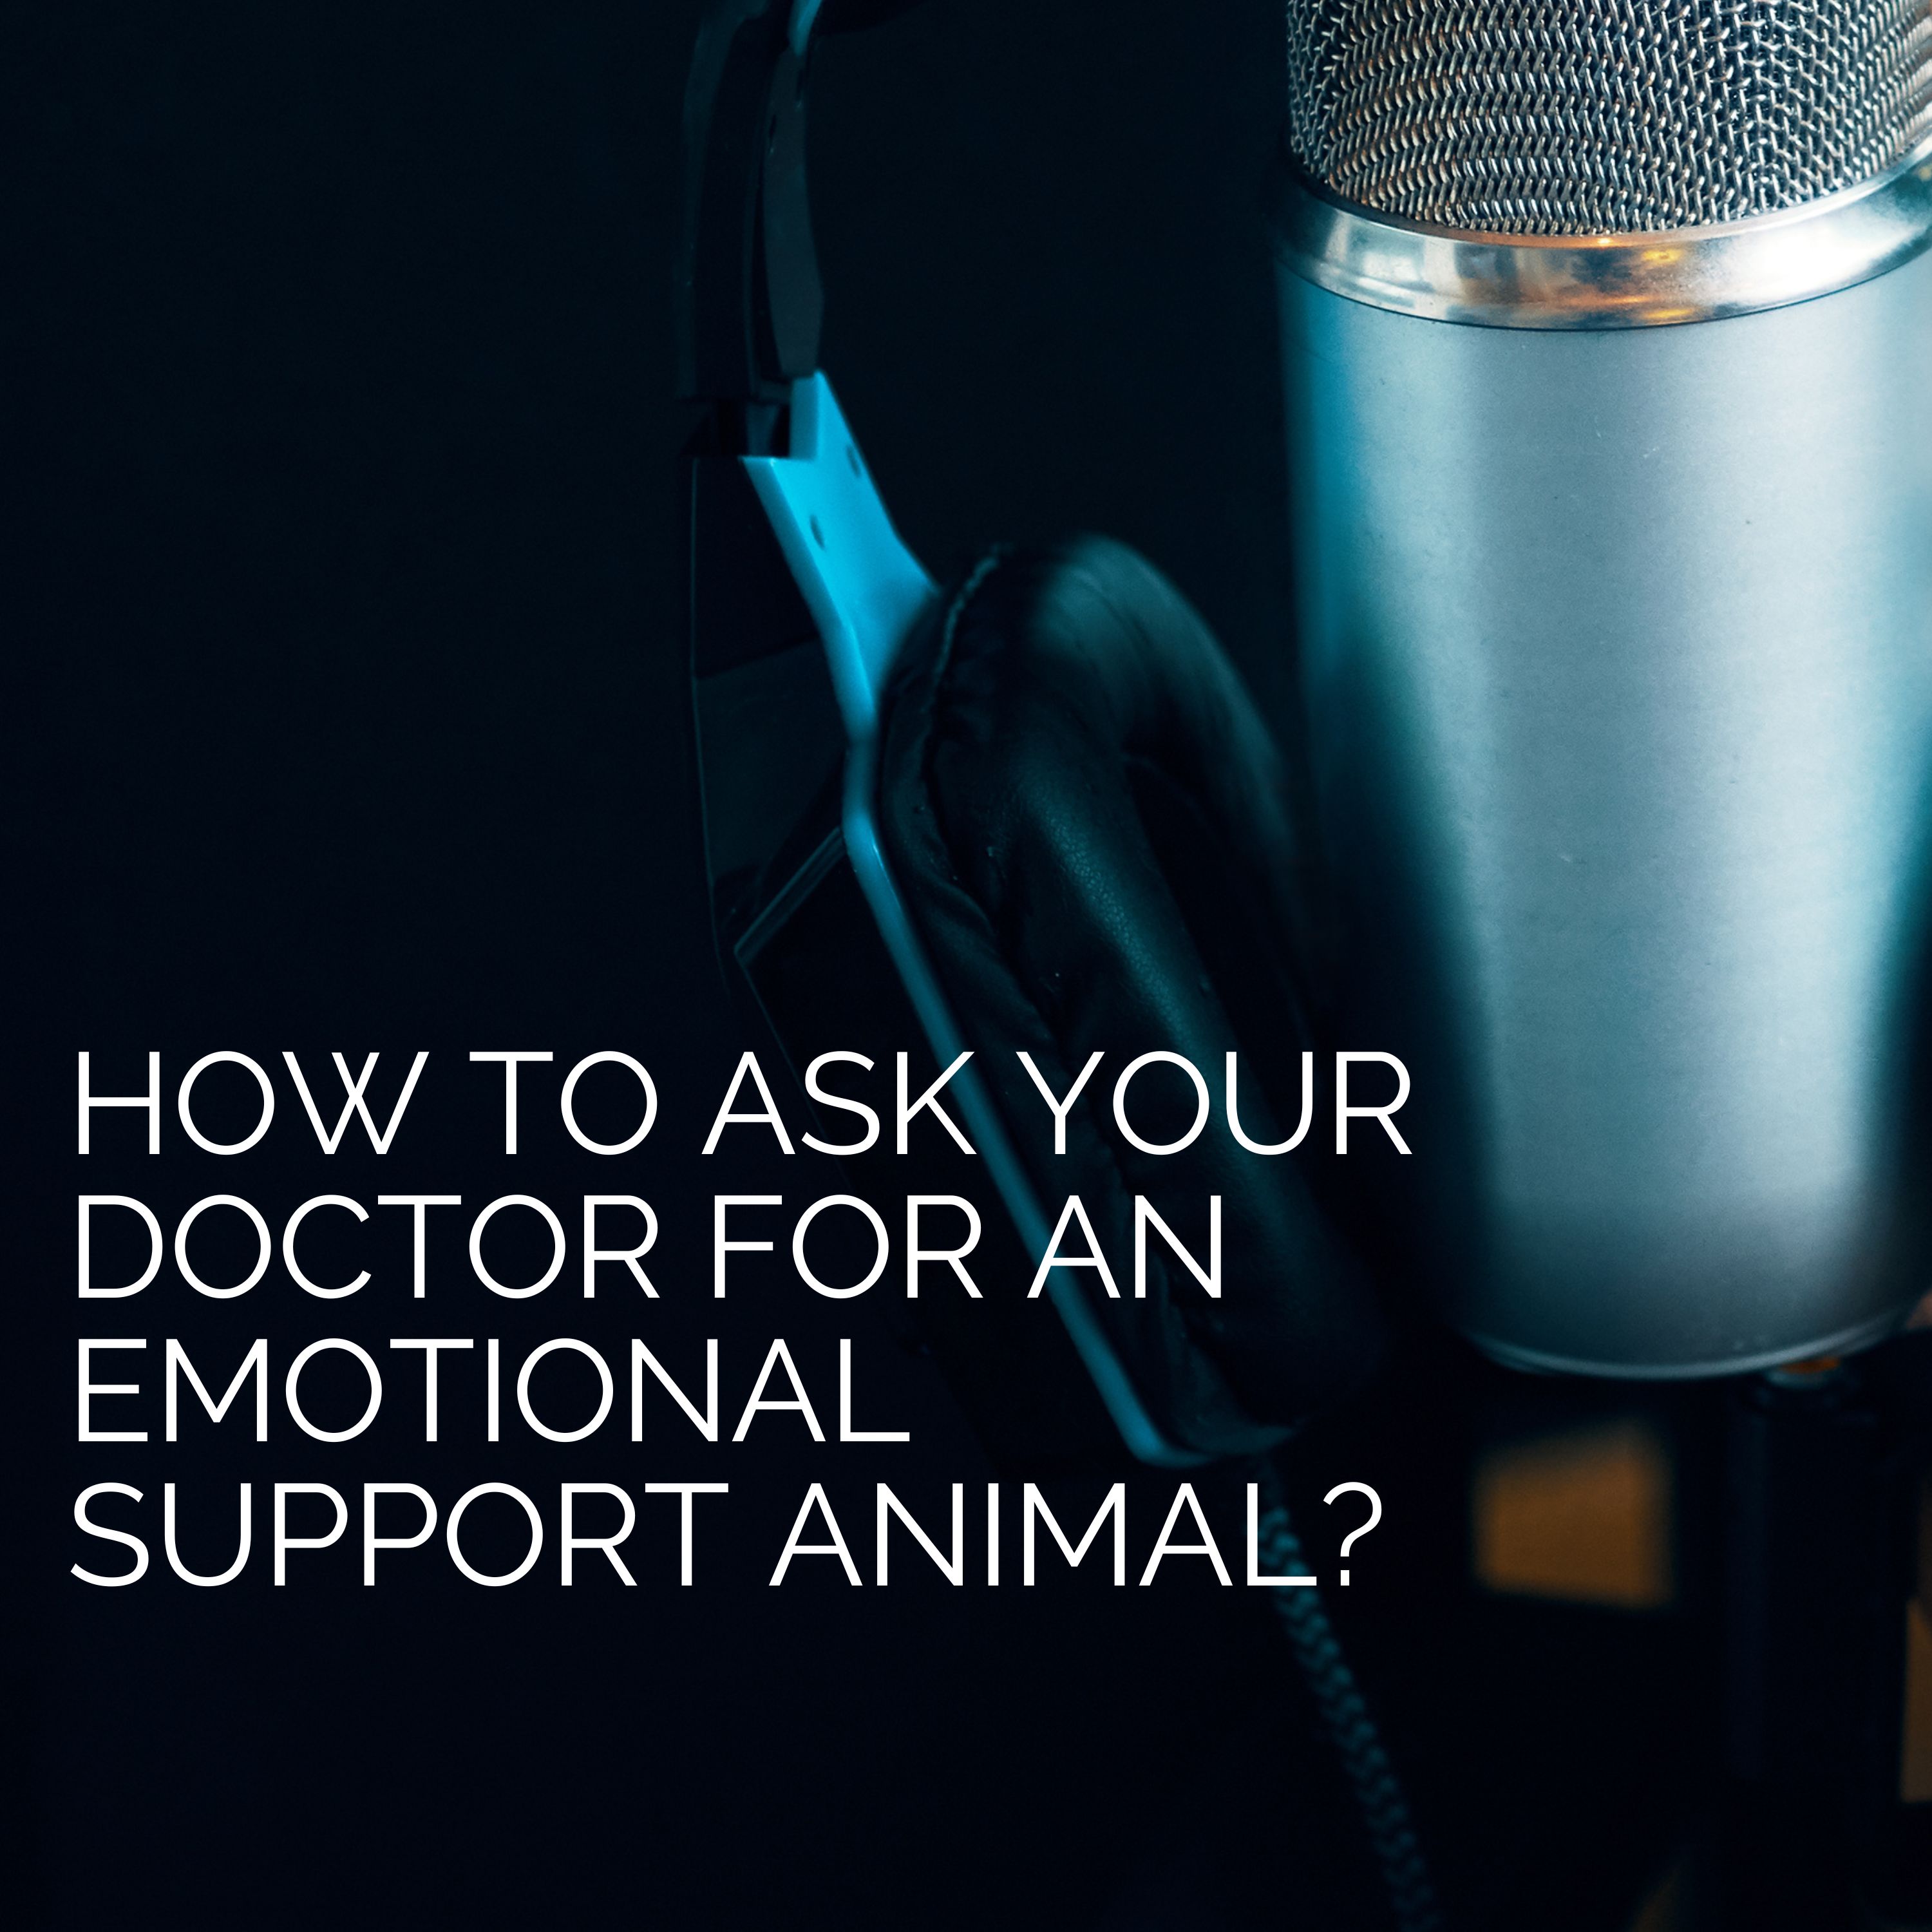 How to ask your doctor for an ESA?